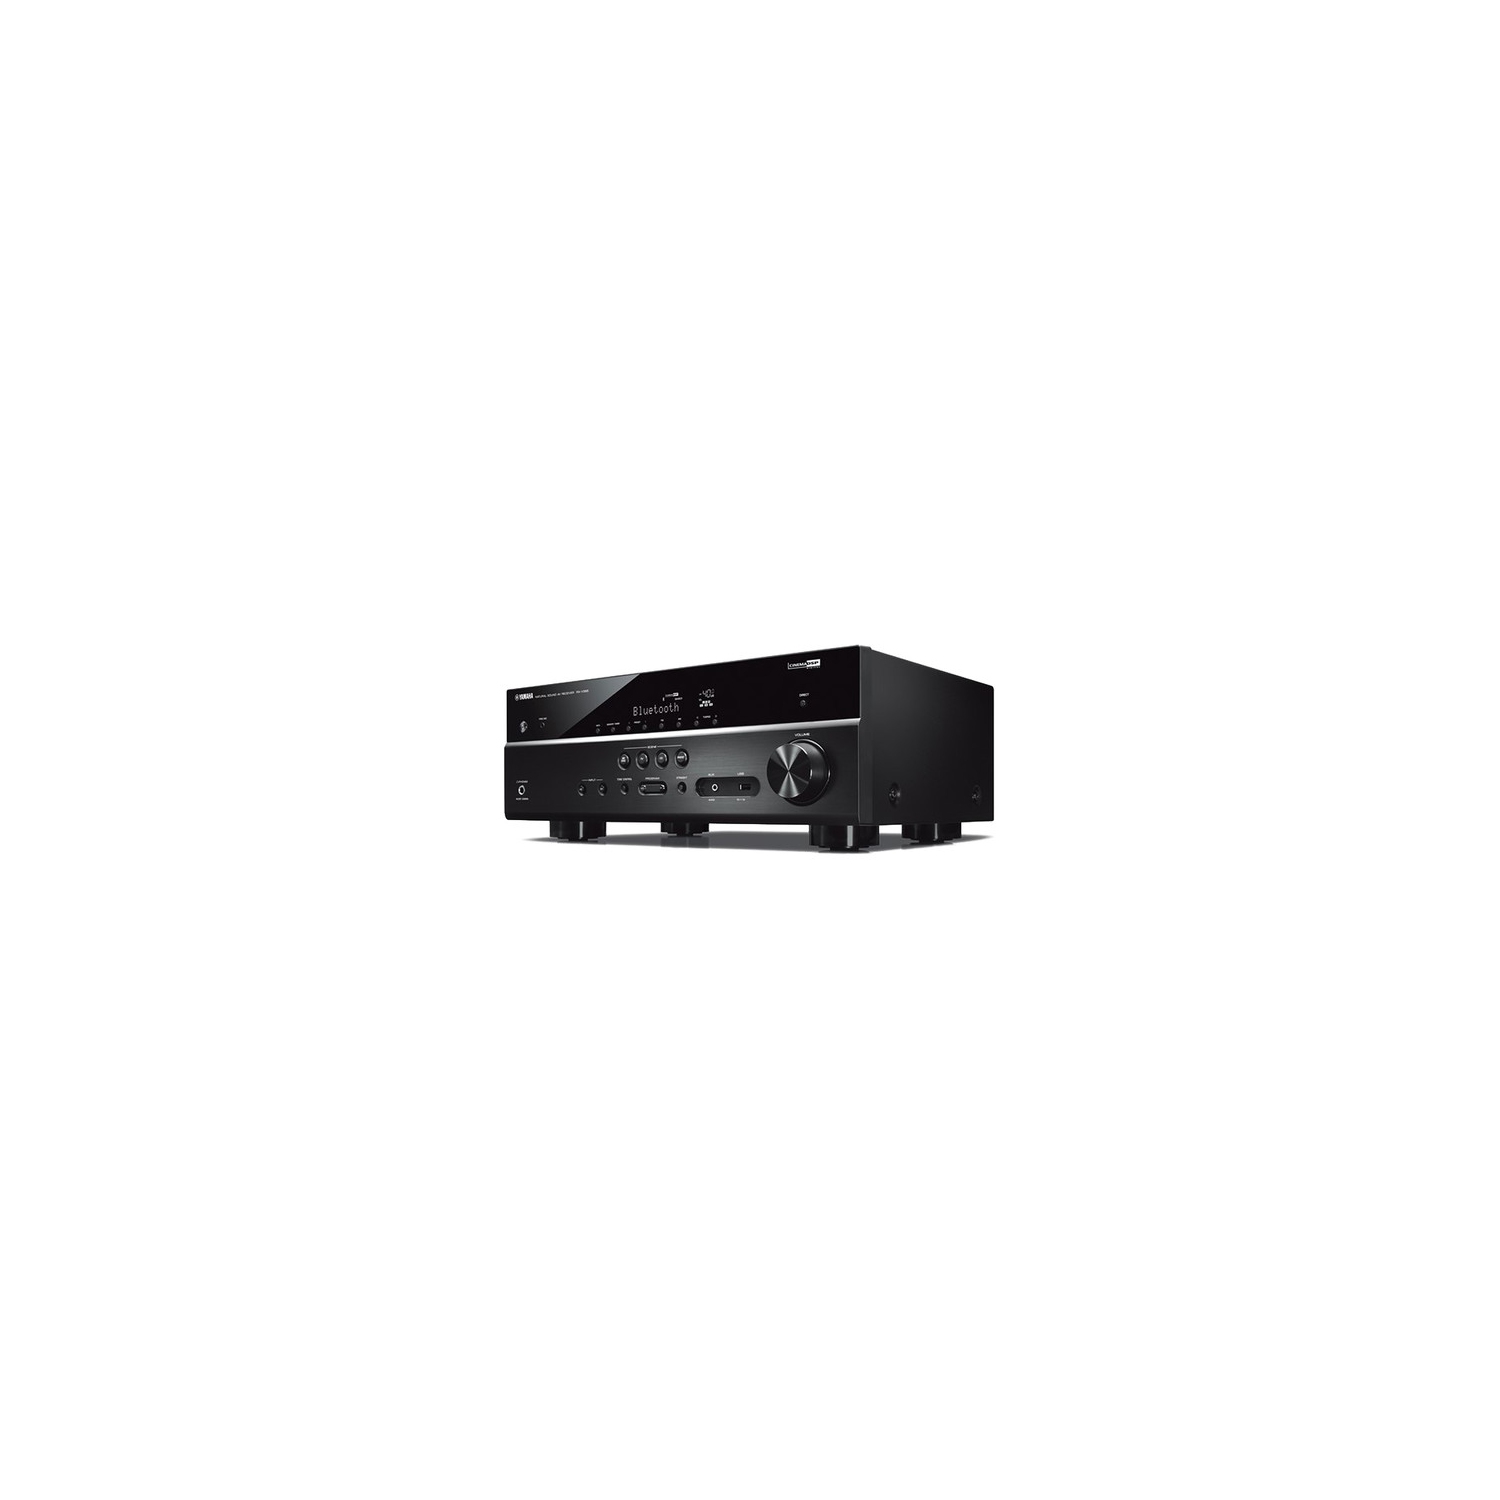 Yamaha RX-V385 5.1-Channel A/V Receiver with Bluetooth